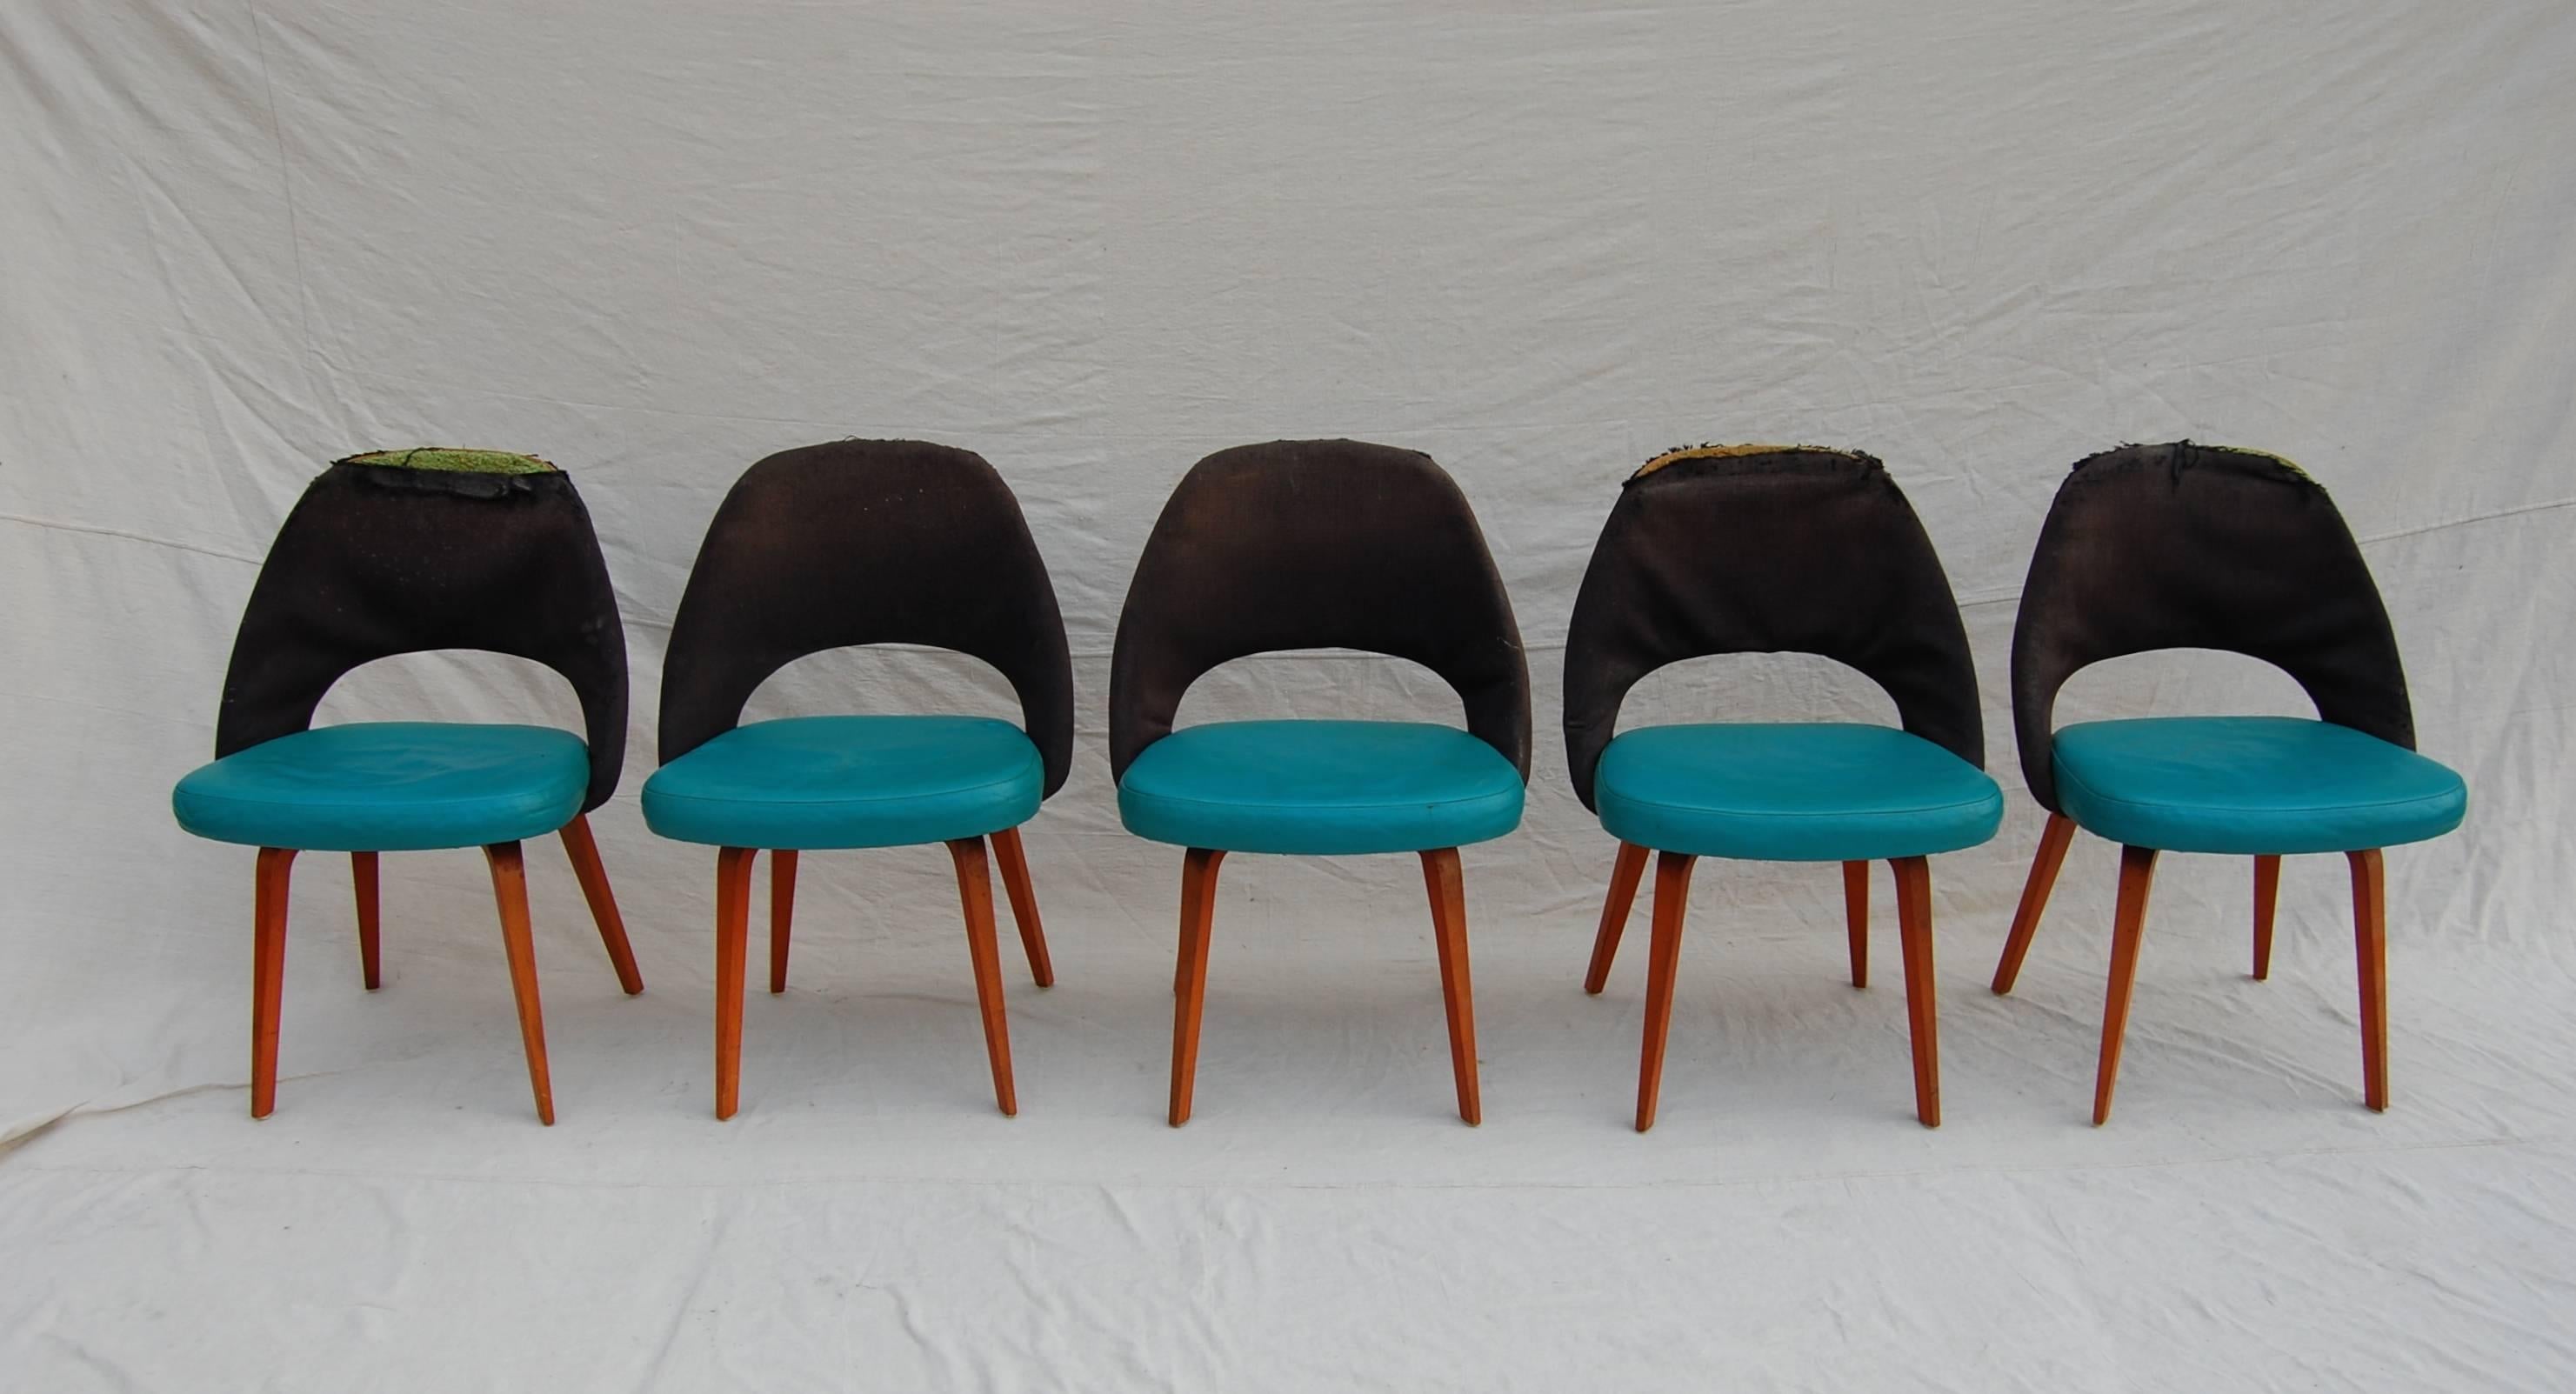 Large set of Saarinen wood legged dining chairs, nine armless and one armed chair. Price includes having them reupholstered in your choice of fabric! Price includes having them professionally done; you just supply your choice of fabric! All foam